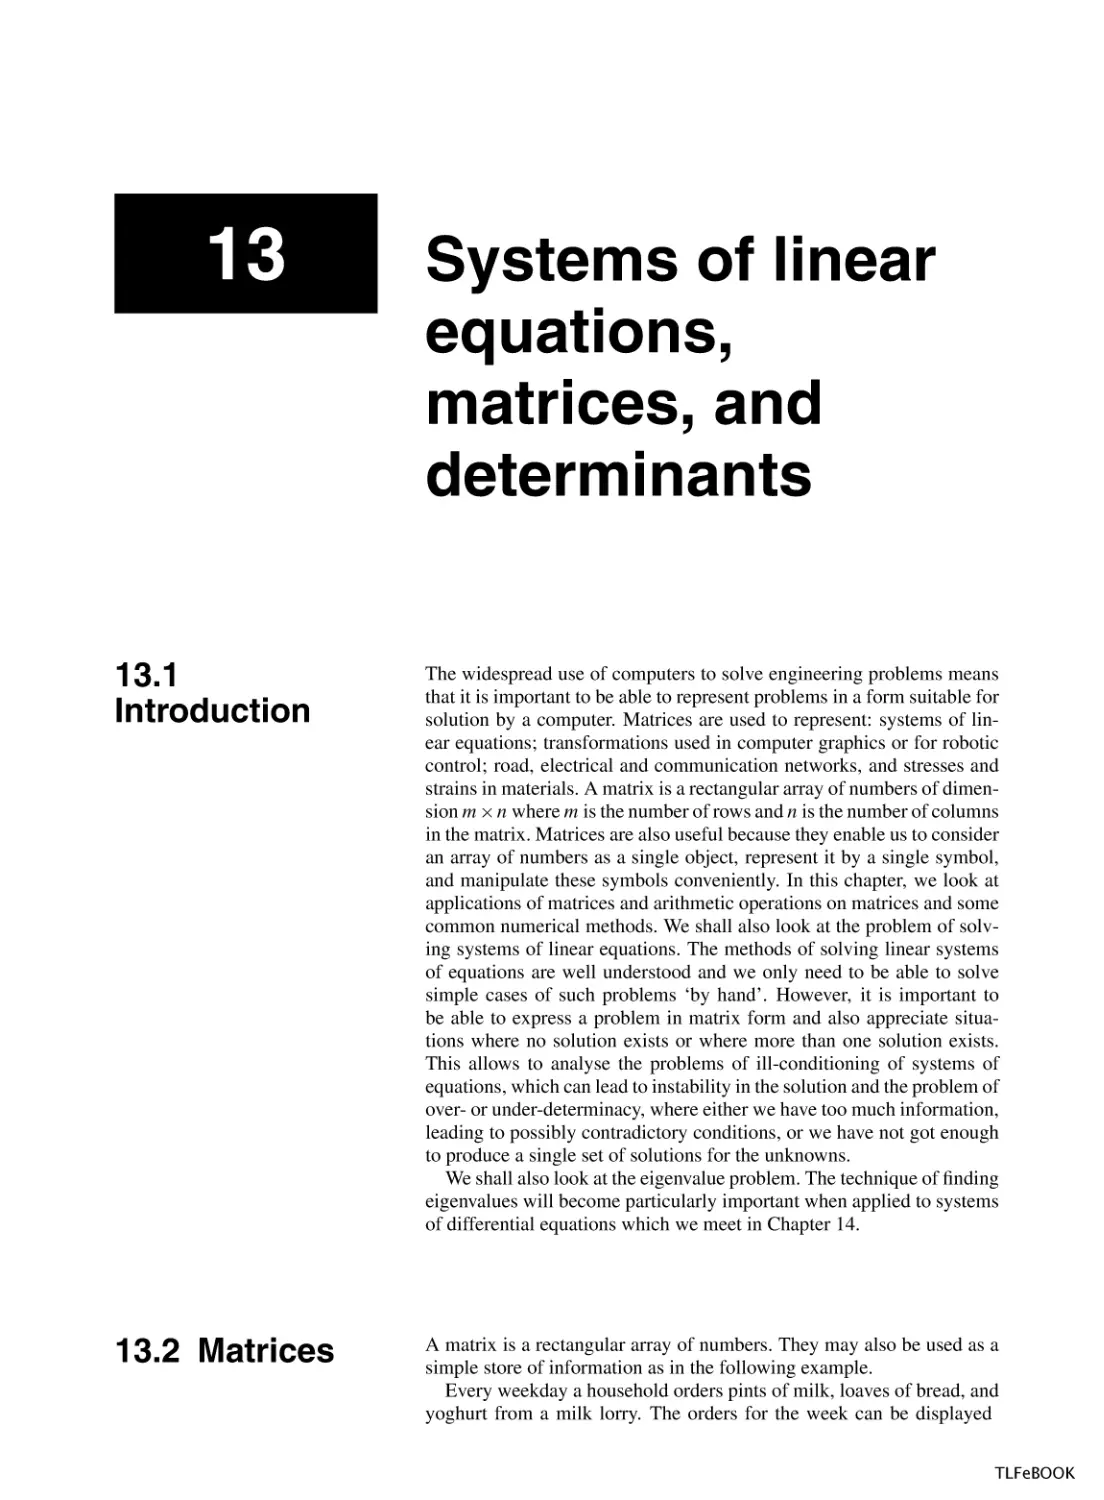 System of Linear Equations, Matrices, and Determinants